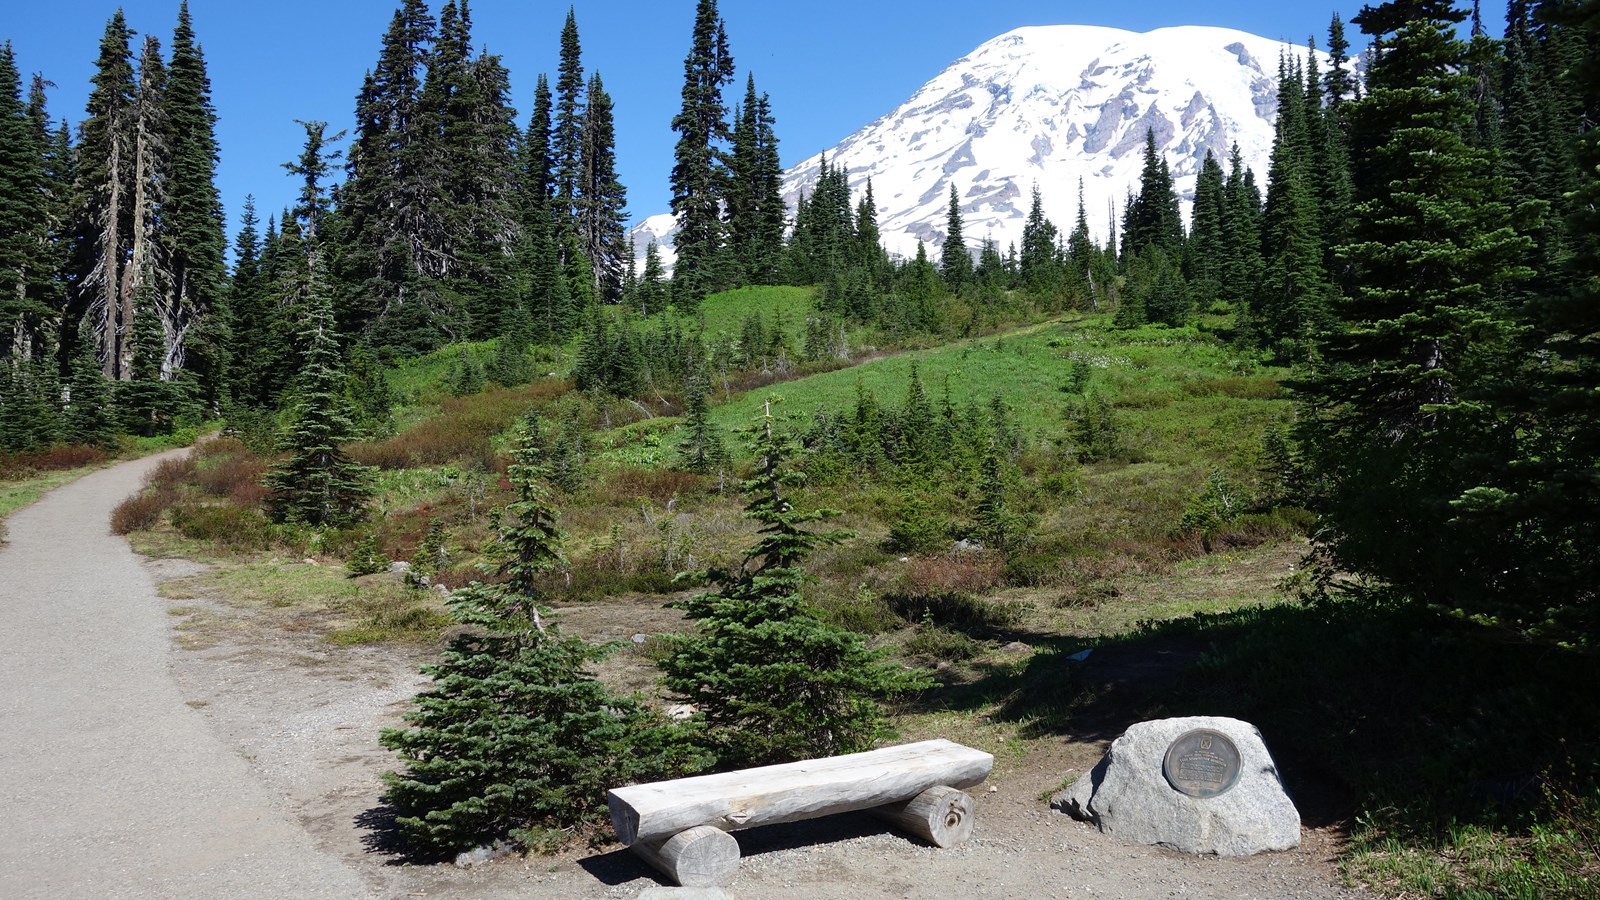 A bronze memorial plaque set into a small boulder next to a trail in front of Mount Rainier.